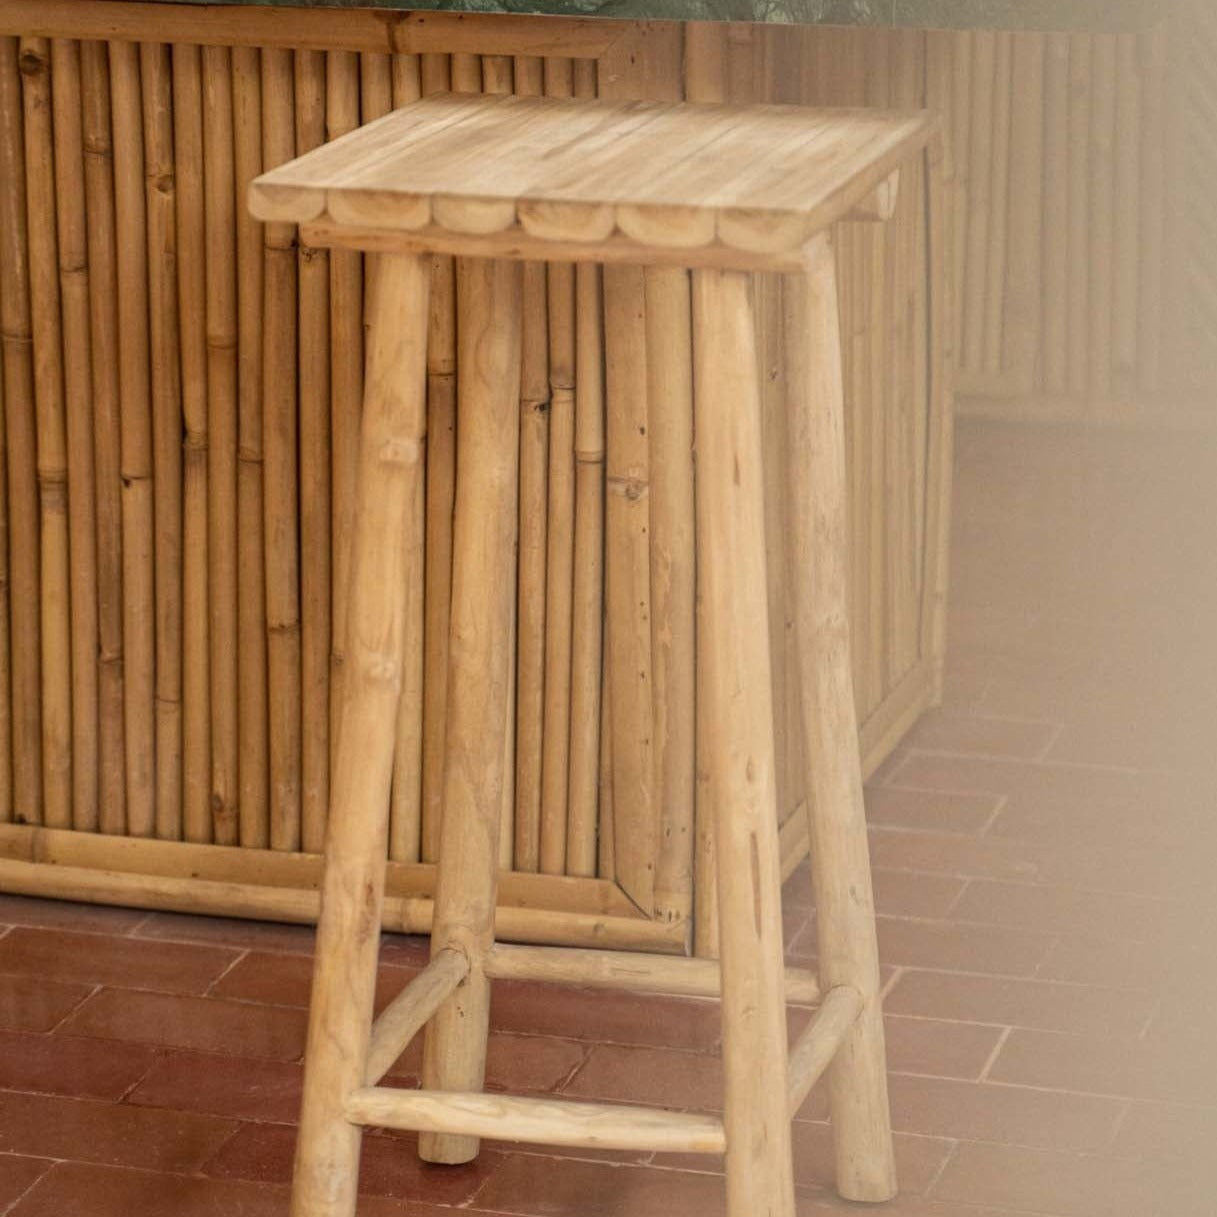 THE ISLAND Bar Stool interior side view